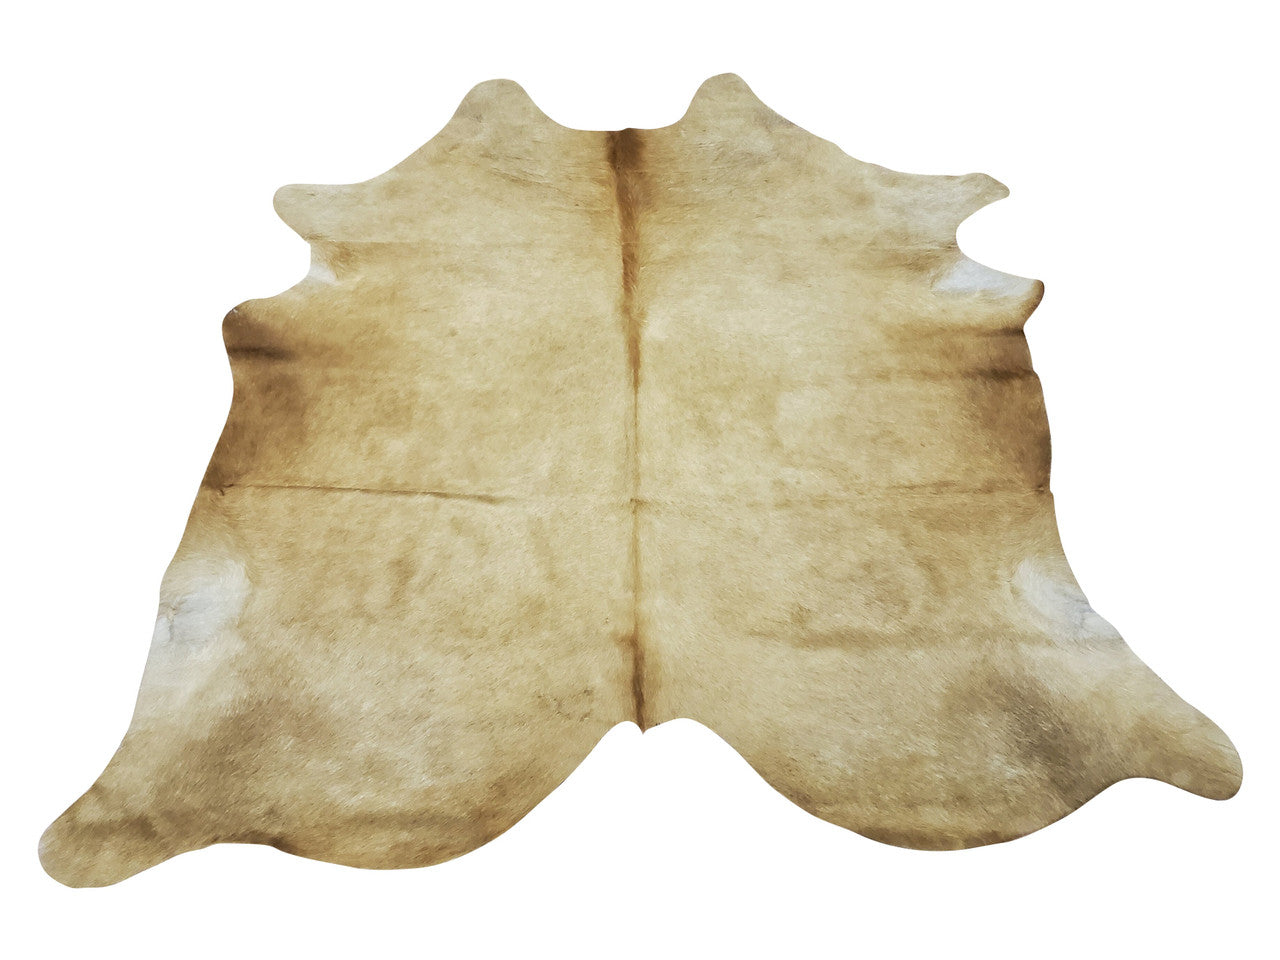 The cowhide rug has a classic design that will never go out of style, making it an excellent choice for decorating your home or office both now and in the future.